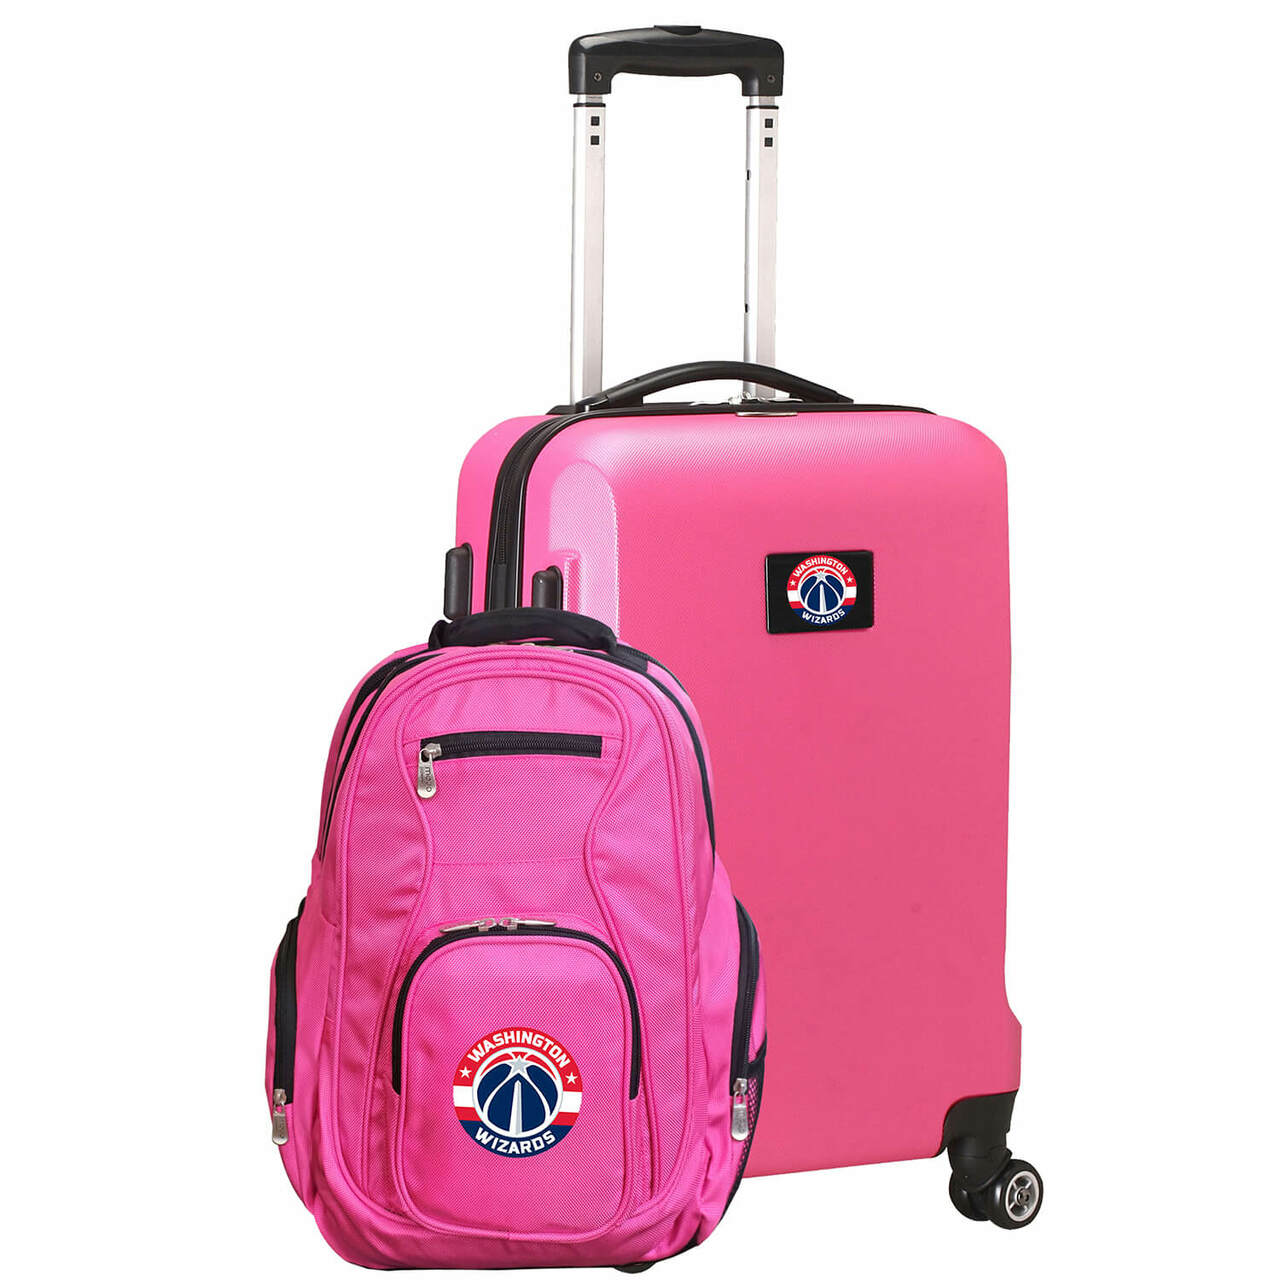 Washington Wizards Deluxe 2-Piece Backpack and Carry on Set in Pink